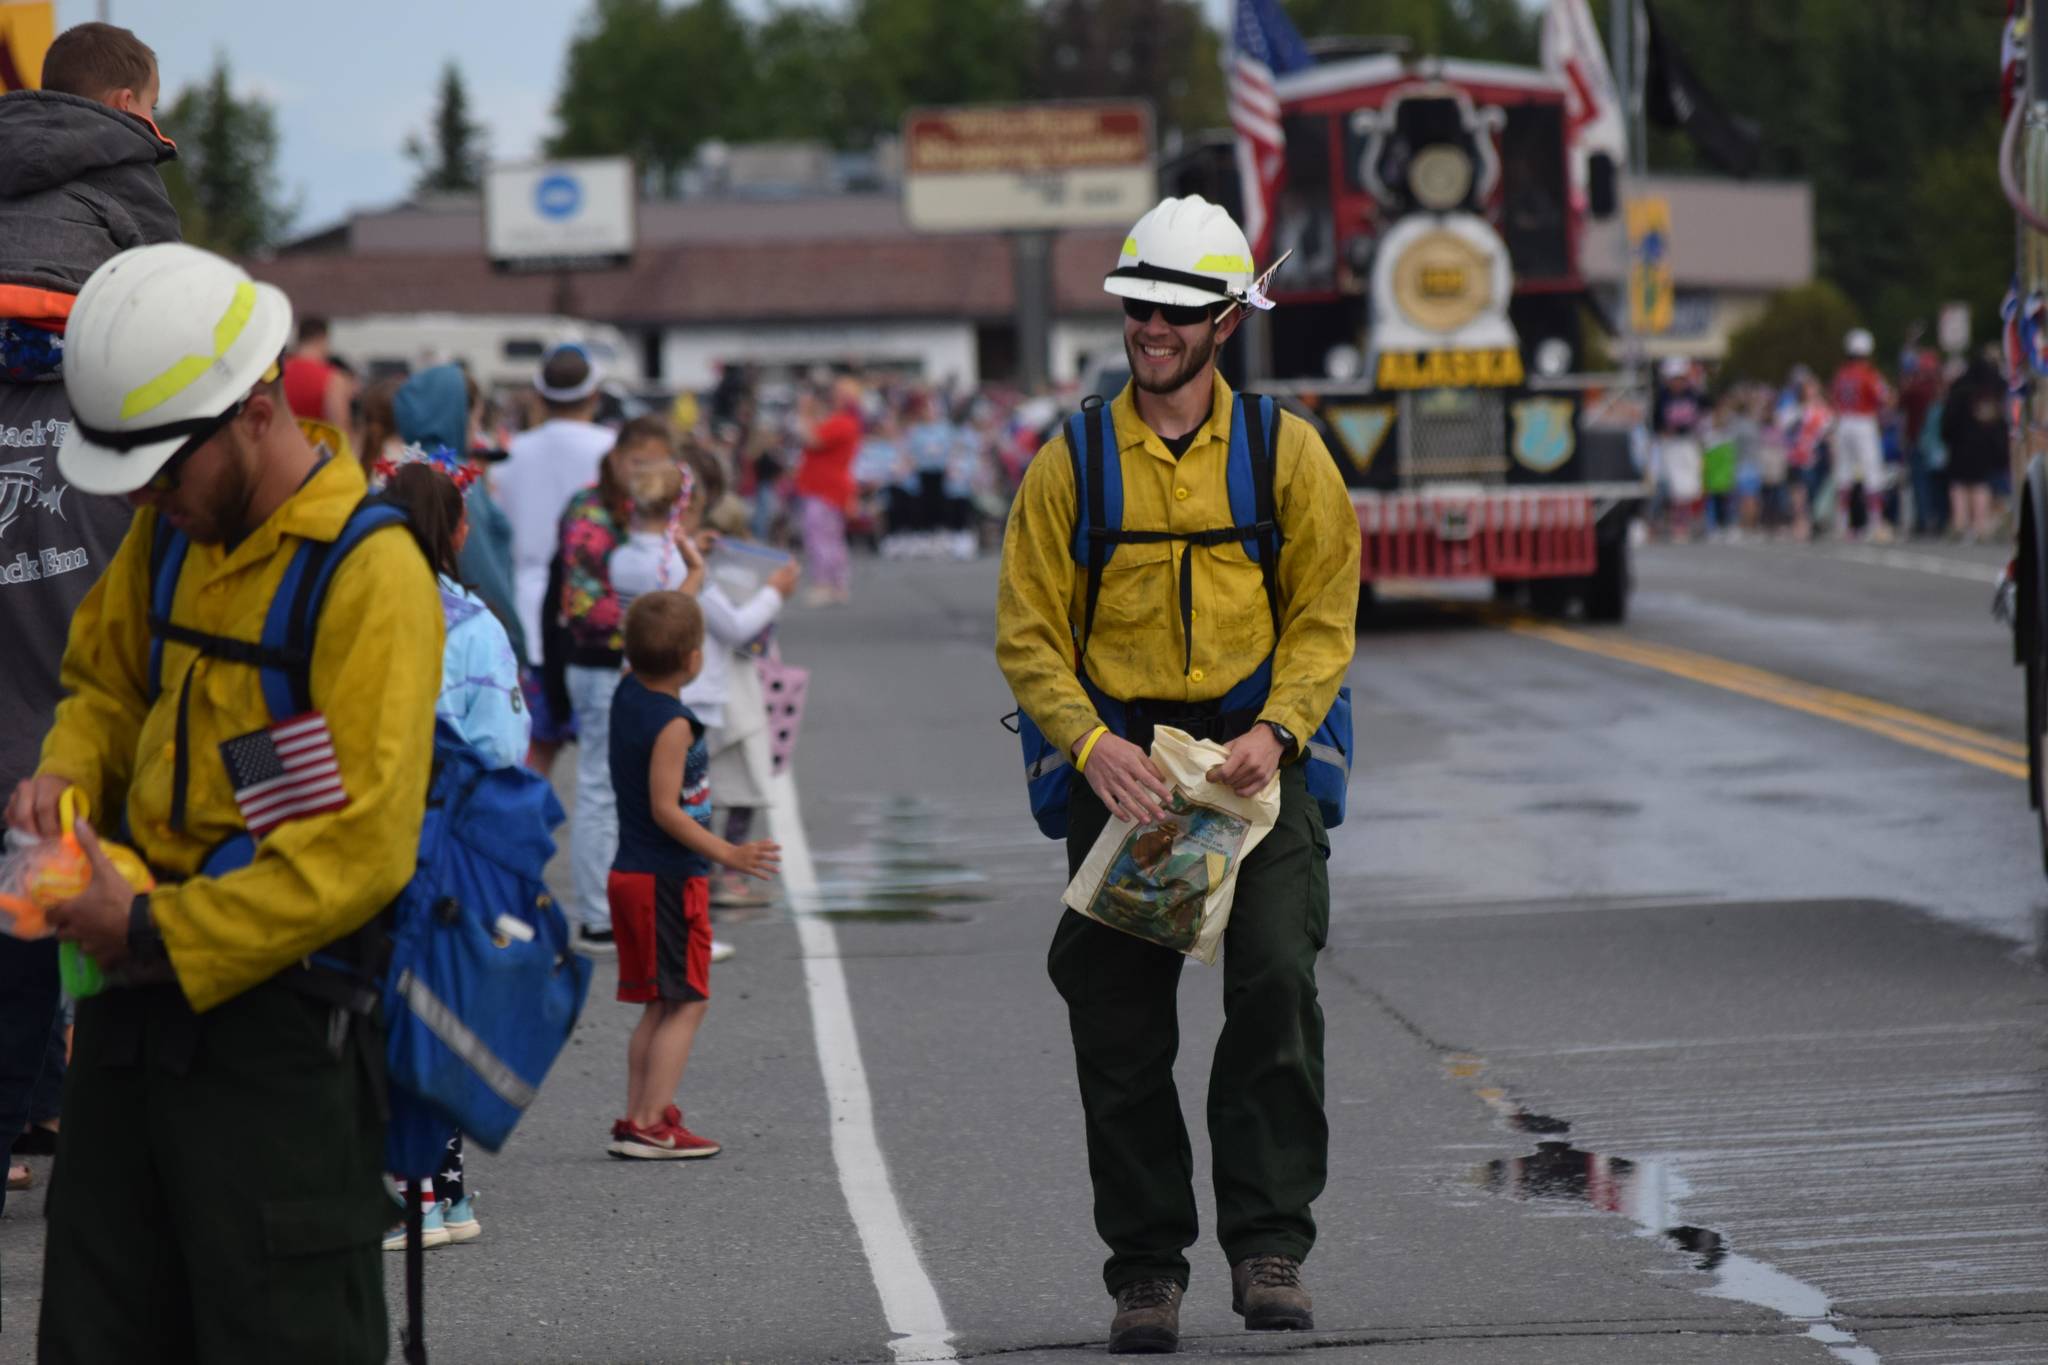 Officials with the Smokey Bear float hand out bracelets during Kenai’s annual Fourth of July parade on July 4, 2021. (Camille Botello / Peninsula Clarion)